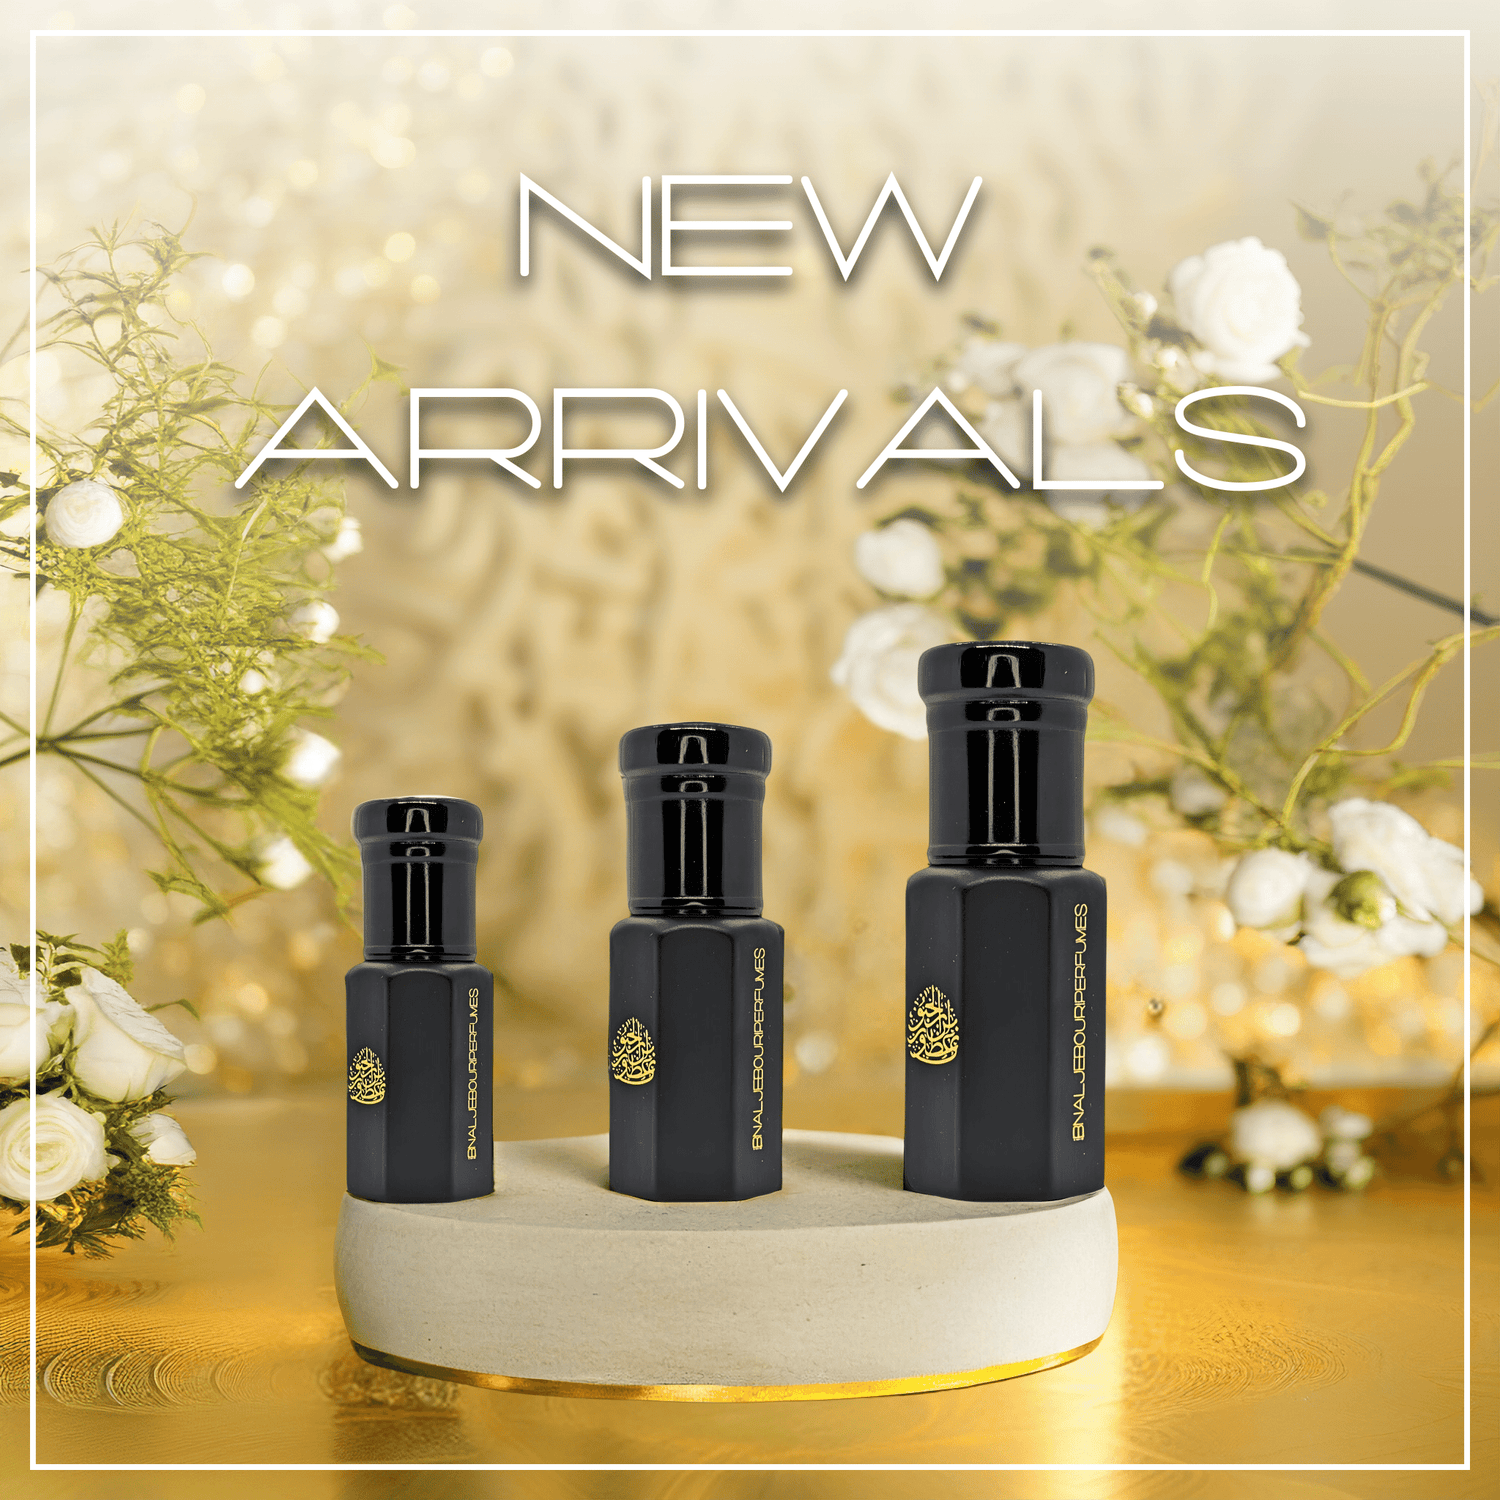 new arrivals of perfume and perfume oil from the house of ibn al jebouri perfumes